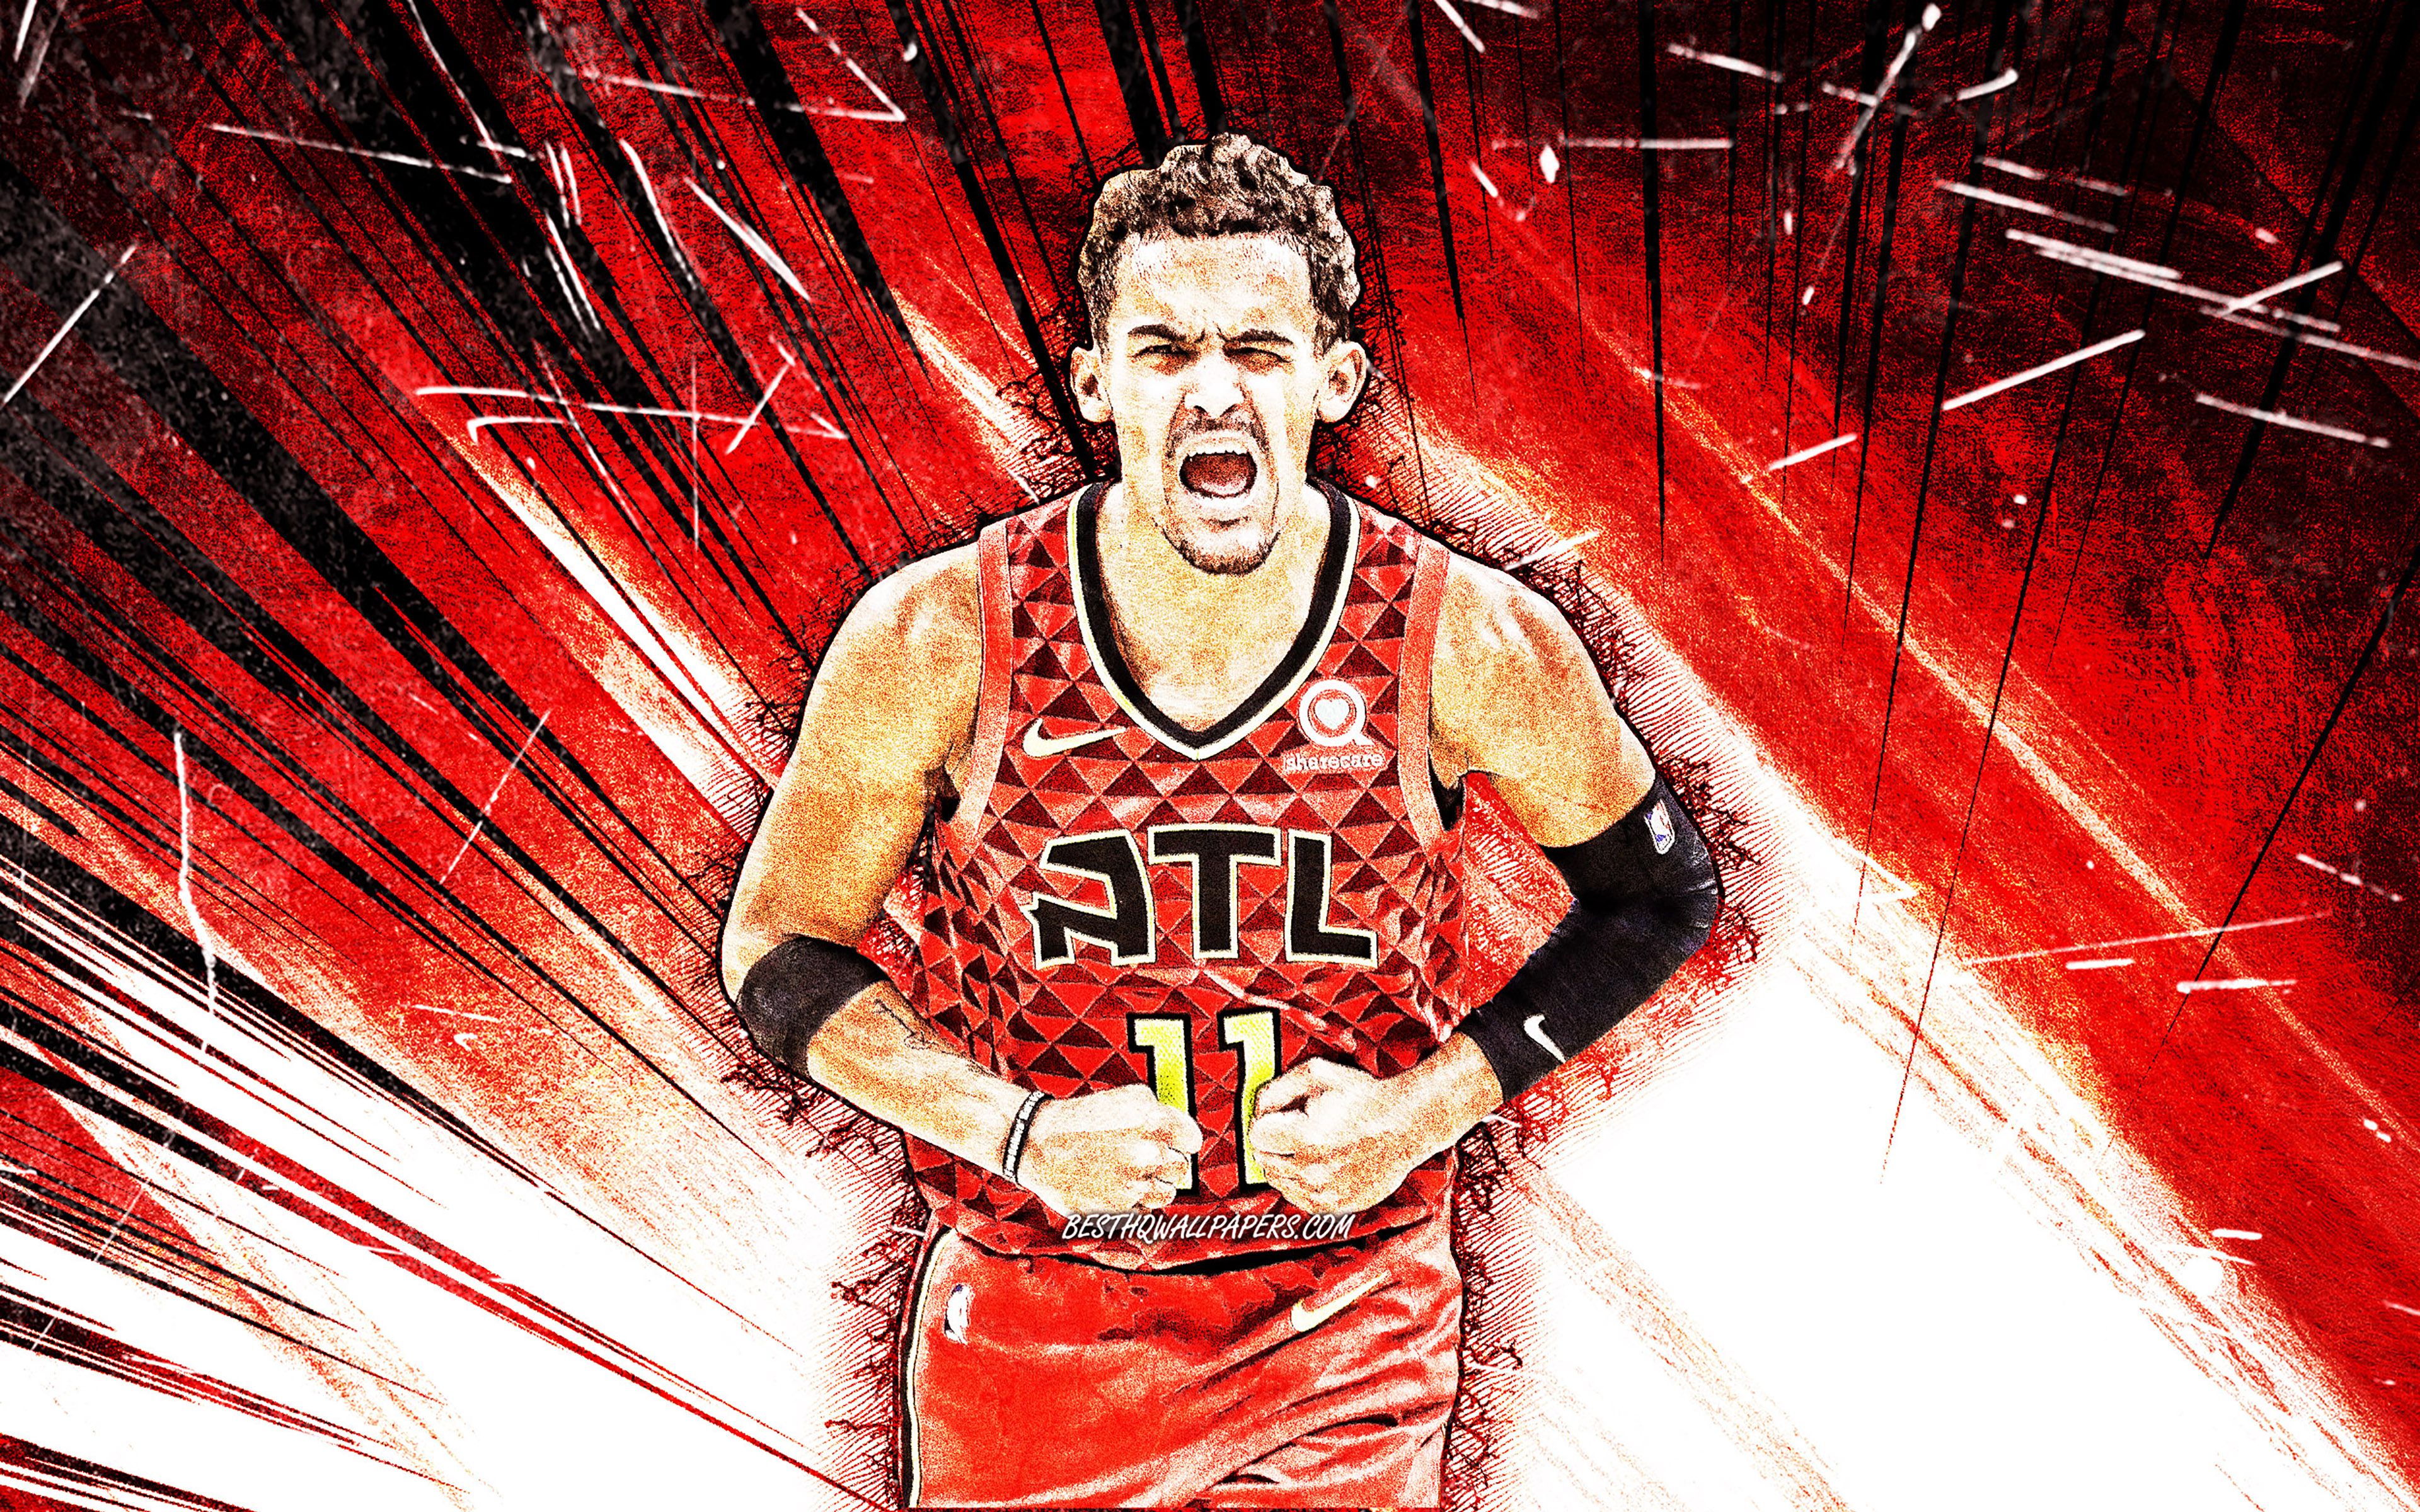 Download wallpaper 4k, Trae Young, grunge art, Atlanta Hawks, NBA, basketball, red abstract rays, Rayford Trae Young, Trae Young Atlanta Hawks, Trae Young 4K for desktop with resolution 3840x2400. High Quality HD